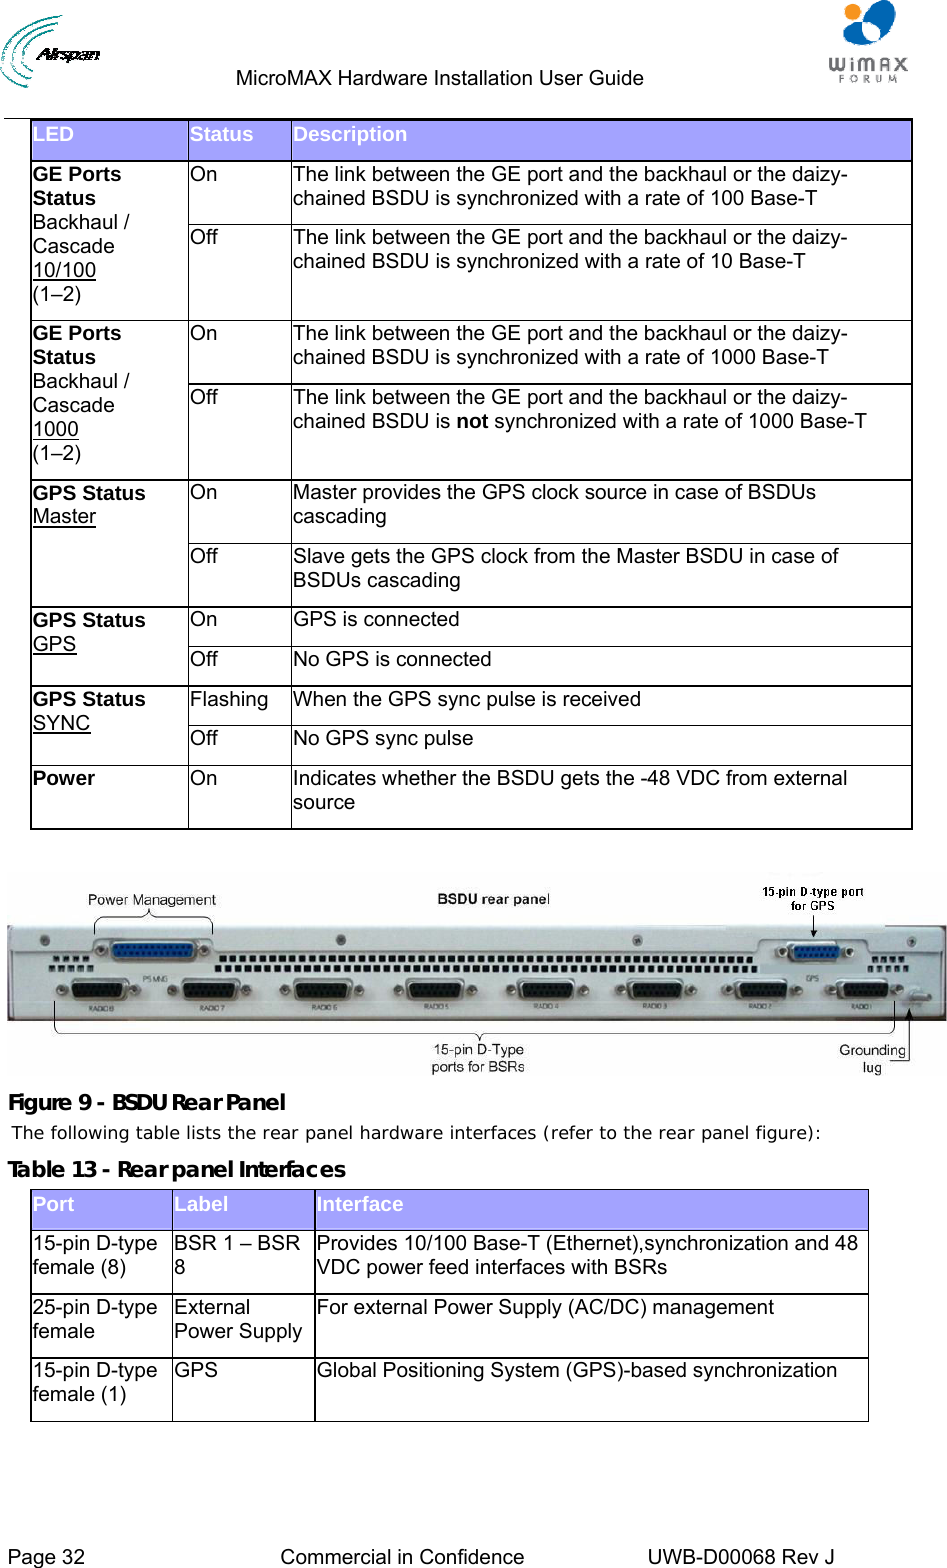                                  MicroMAX Hardware Installation User Guide     Page 32  Commercial in Confidence  UWB-D00068 Rev J   LED  Status  Description On  The link between the GE port and the backhaul or the daizy-chained BSDU is synchronized with a rate of 100 Base-T GE Ports Status Backhaul / Cascade 10/100 (1–2) Off  The link between the GE port and the backhaul or the daizy-chained BSDU is synchronized with a rate of 10 Base-T On  The link between the GE port and the backhaul or the daizy-chained BSDU is synchronized with a rate of 1000 Base-T GE Ports Status Backhaul / Cascade 1000 (1–2) Off  The link between the GE port and the backhaul or the daizy-chained BSDU is not synchronized with a rate of 1000 Base-T On  Master provides the GPS clock source in case of BSDUs cascading GPS Status Master Off  Slave gets the GPS clock from the Master BSDU in case of BSDUs cascading On  GPS is connected GPS Status GPS Off  No GPS is connected Flashing  When the GPS sync pulse is received GPS Status SYNC Off  No GPS sync pulse Power  On  Indicates whether the BSDU gets the -48 VDC from external source   Figure 9 - BSDU Rear Panel The following table lists the rear panel hardware interfaces (refer to the rear panel figure): Table 13 - Rear panel Interfaces Port  Label  Interface 15-pin D-type female (8)  BSR 1 – BSR 8  Provides 10/100 Base-T (Ethernet),synchronization and 48 VDC power feed interfaces with BSRs 25-pin D-type female External Power Supply For external Power Supply (AC/DC)  management 15-pin D-type female (1) GPS  Global Positioning System (GPS)-based synchronization 